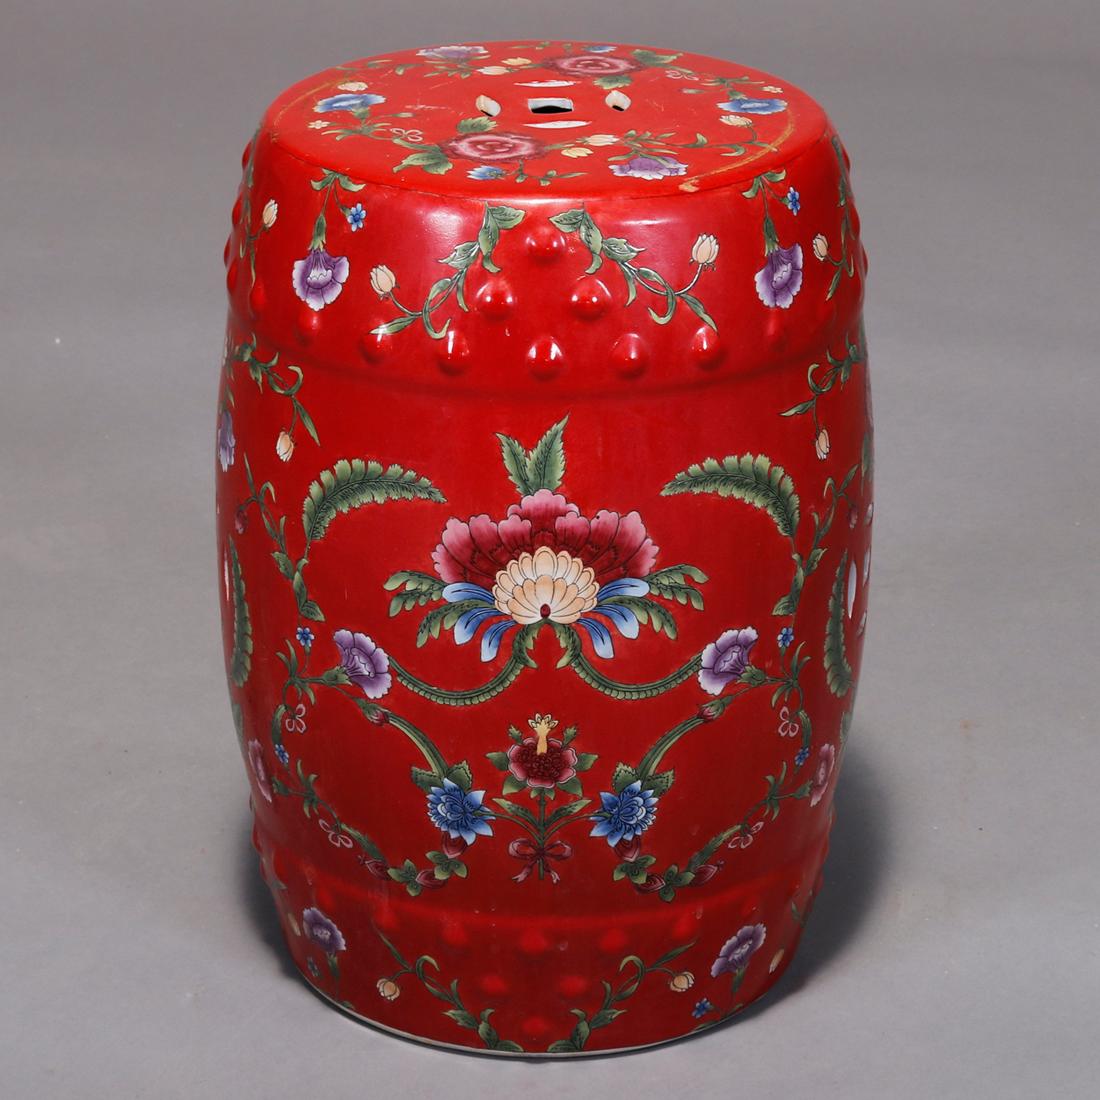 A vintage Chinese garden seat offers glazed pottery construction with allover hand painted floral decoration and pierced with textured upper and lower bands, 20th century

Measures: 18